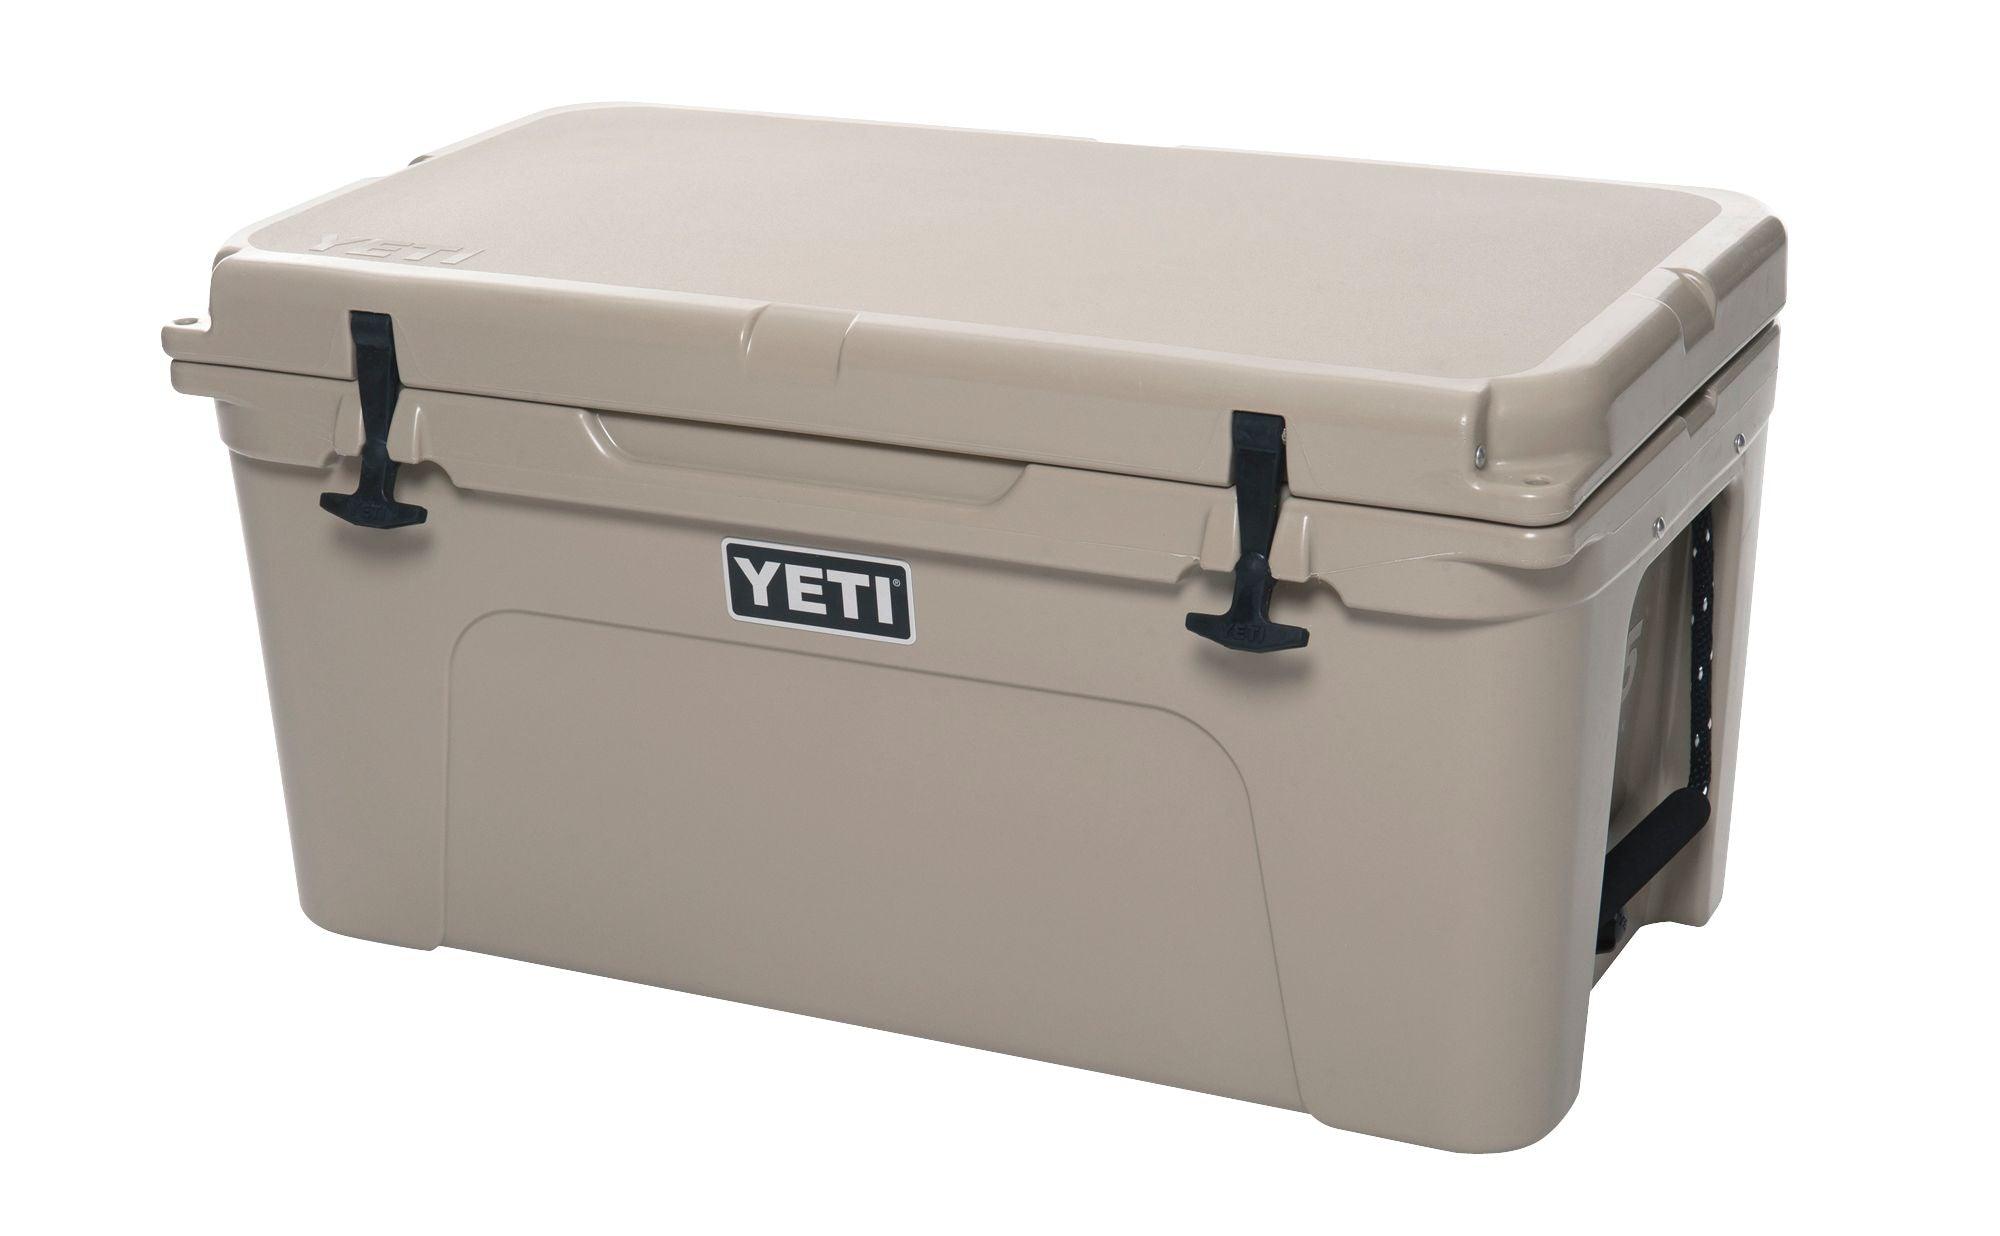 YETI Tundra 65 Insulated Chest Cooler at